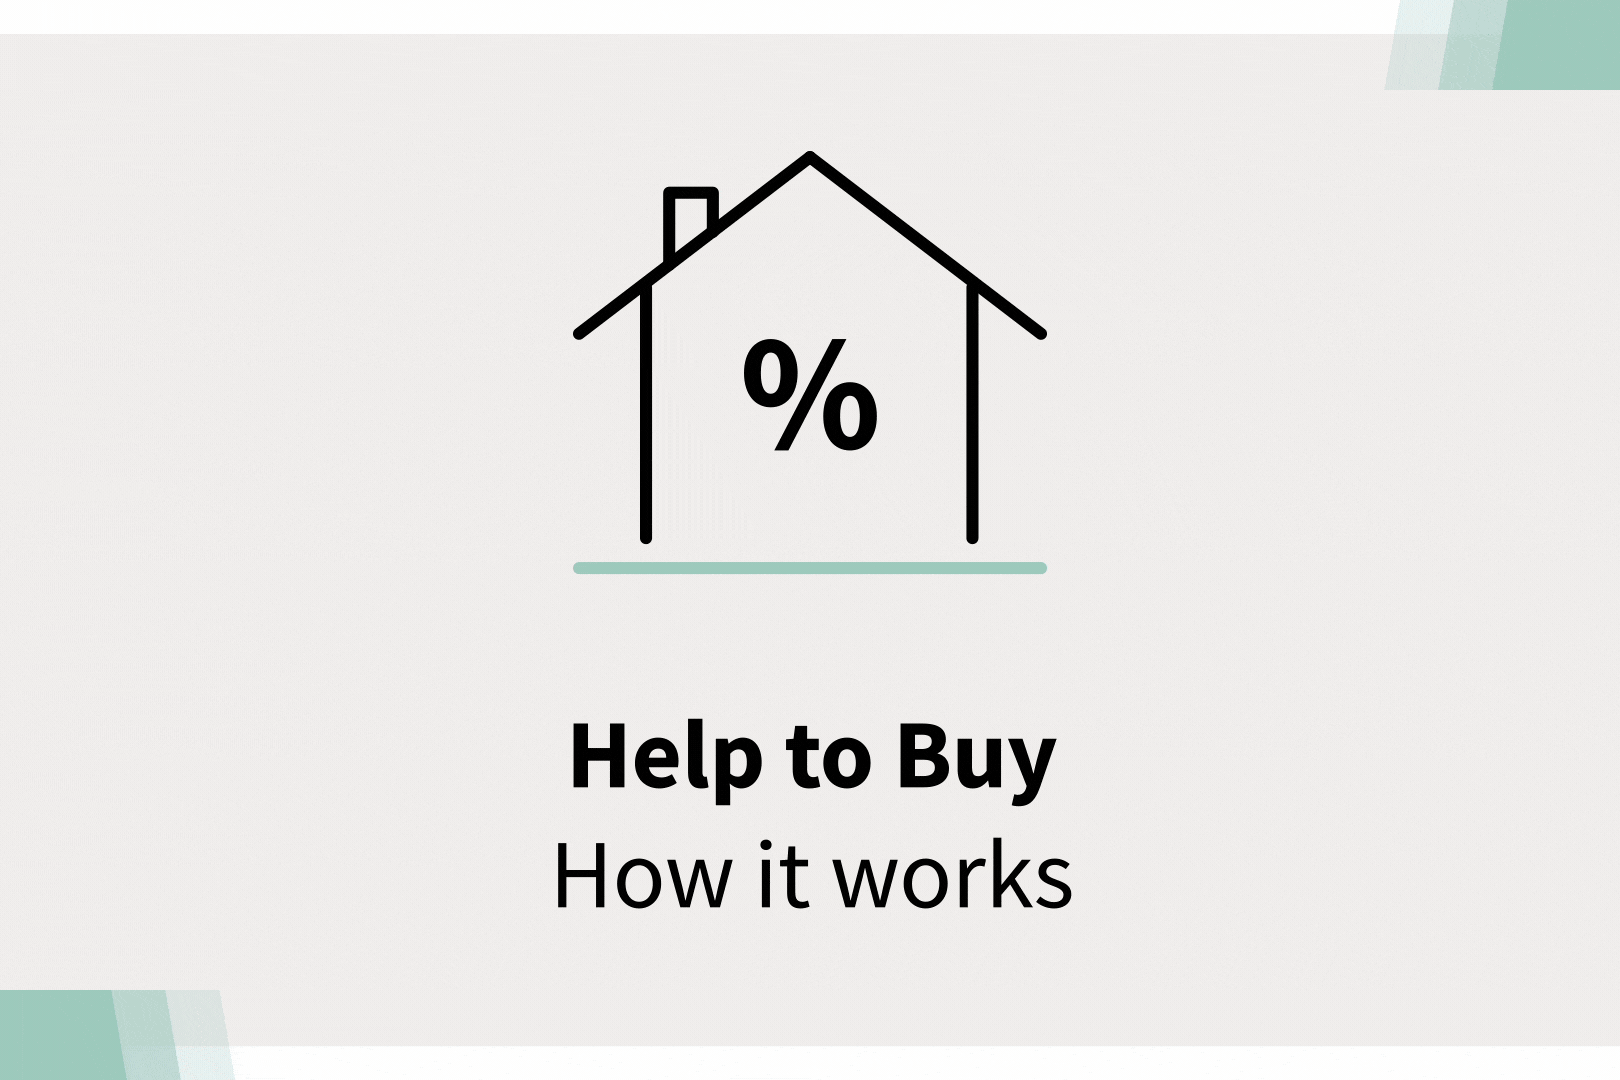 London Help to Buy - you could buy a new home with just a 5% deposit